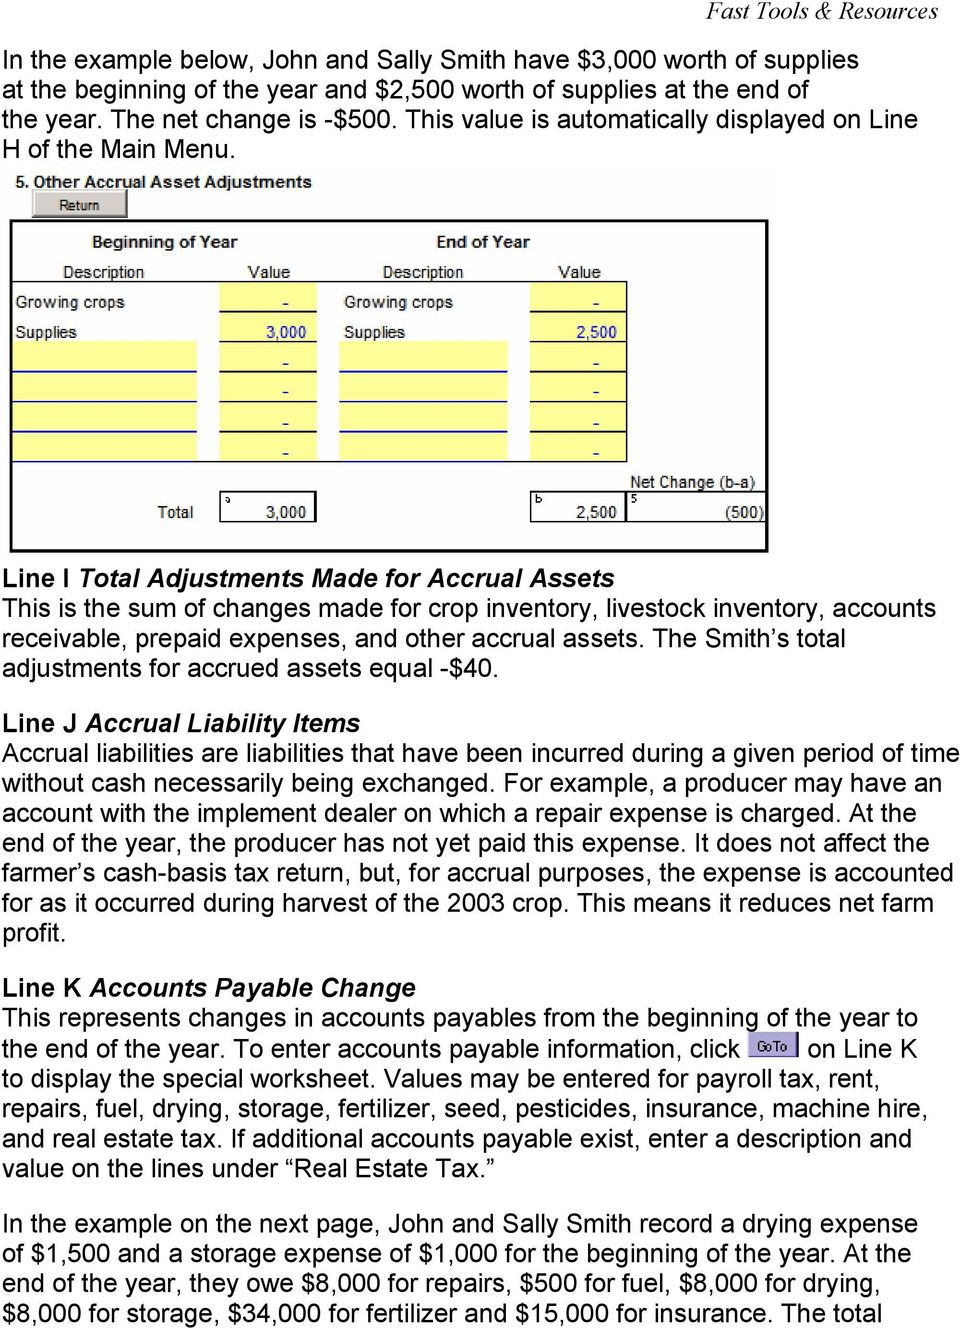 Line I Total Adjustments Made for Accrual Assets This is the sum of changes made for crop inventory, livestock inventory, accounts receivable, prepaid expenses, and other accrual assets.